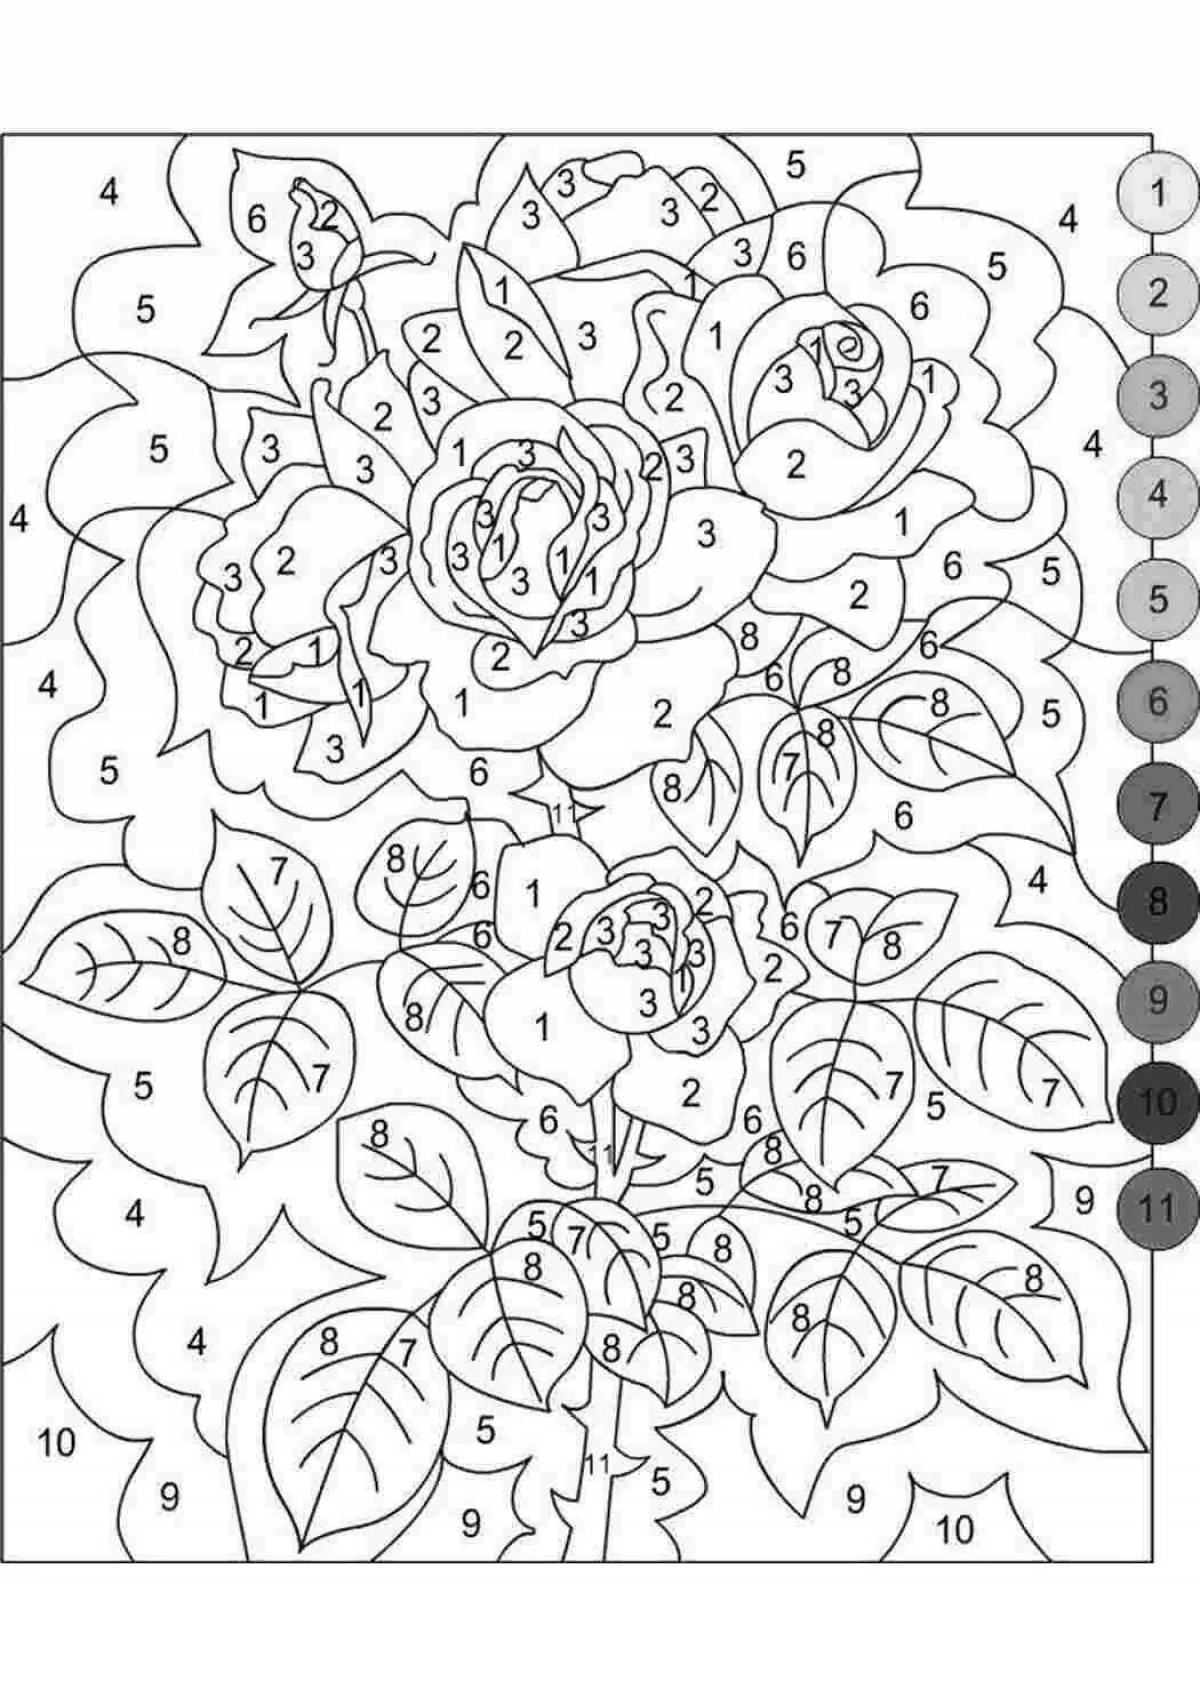 Avito playful coloring by numbers